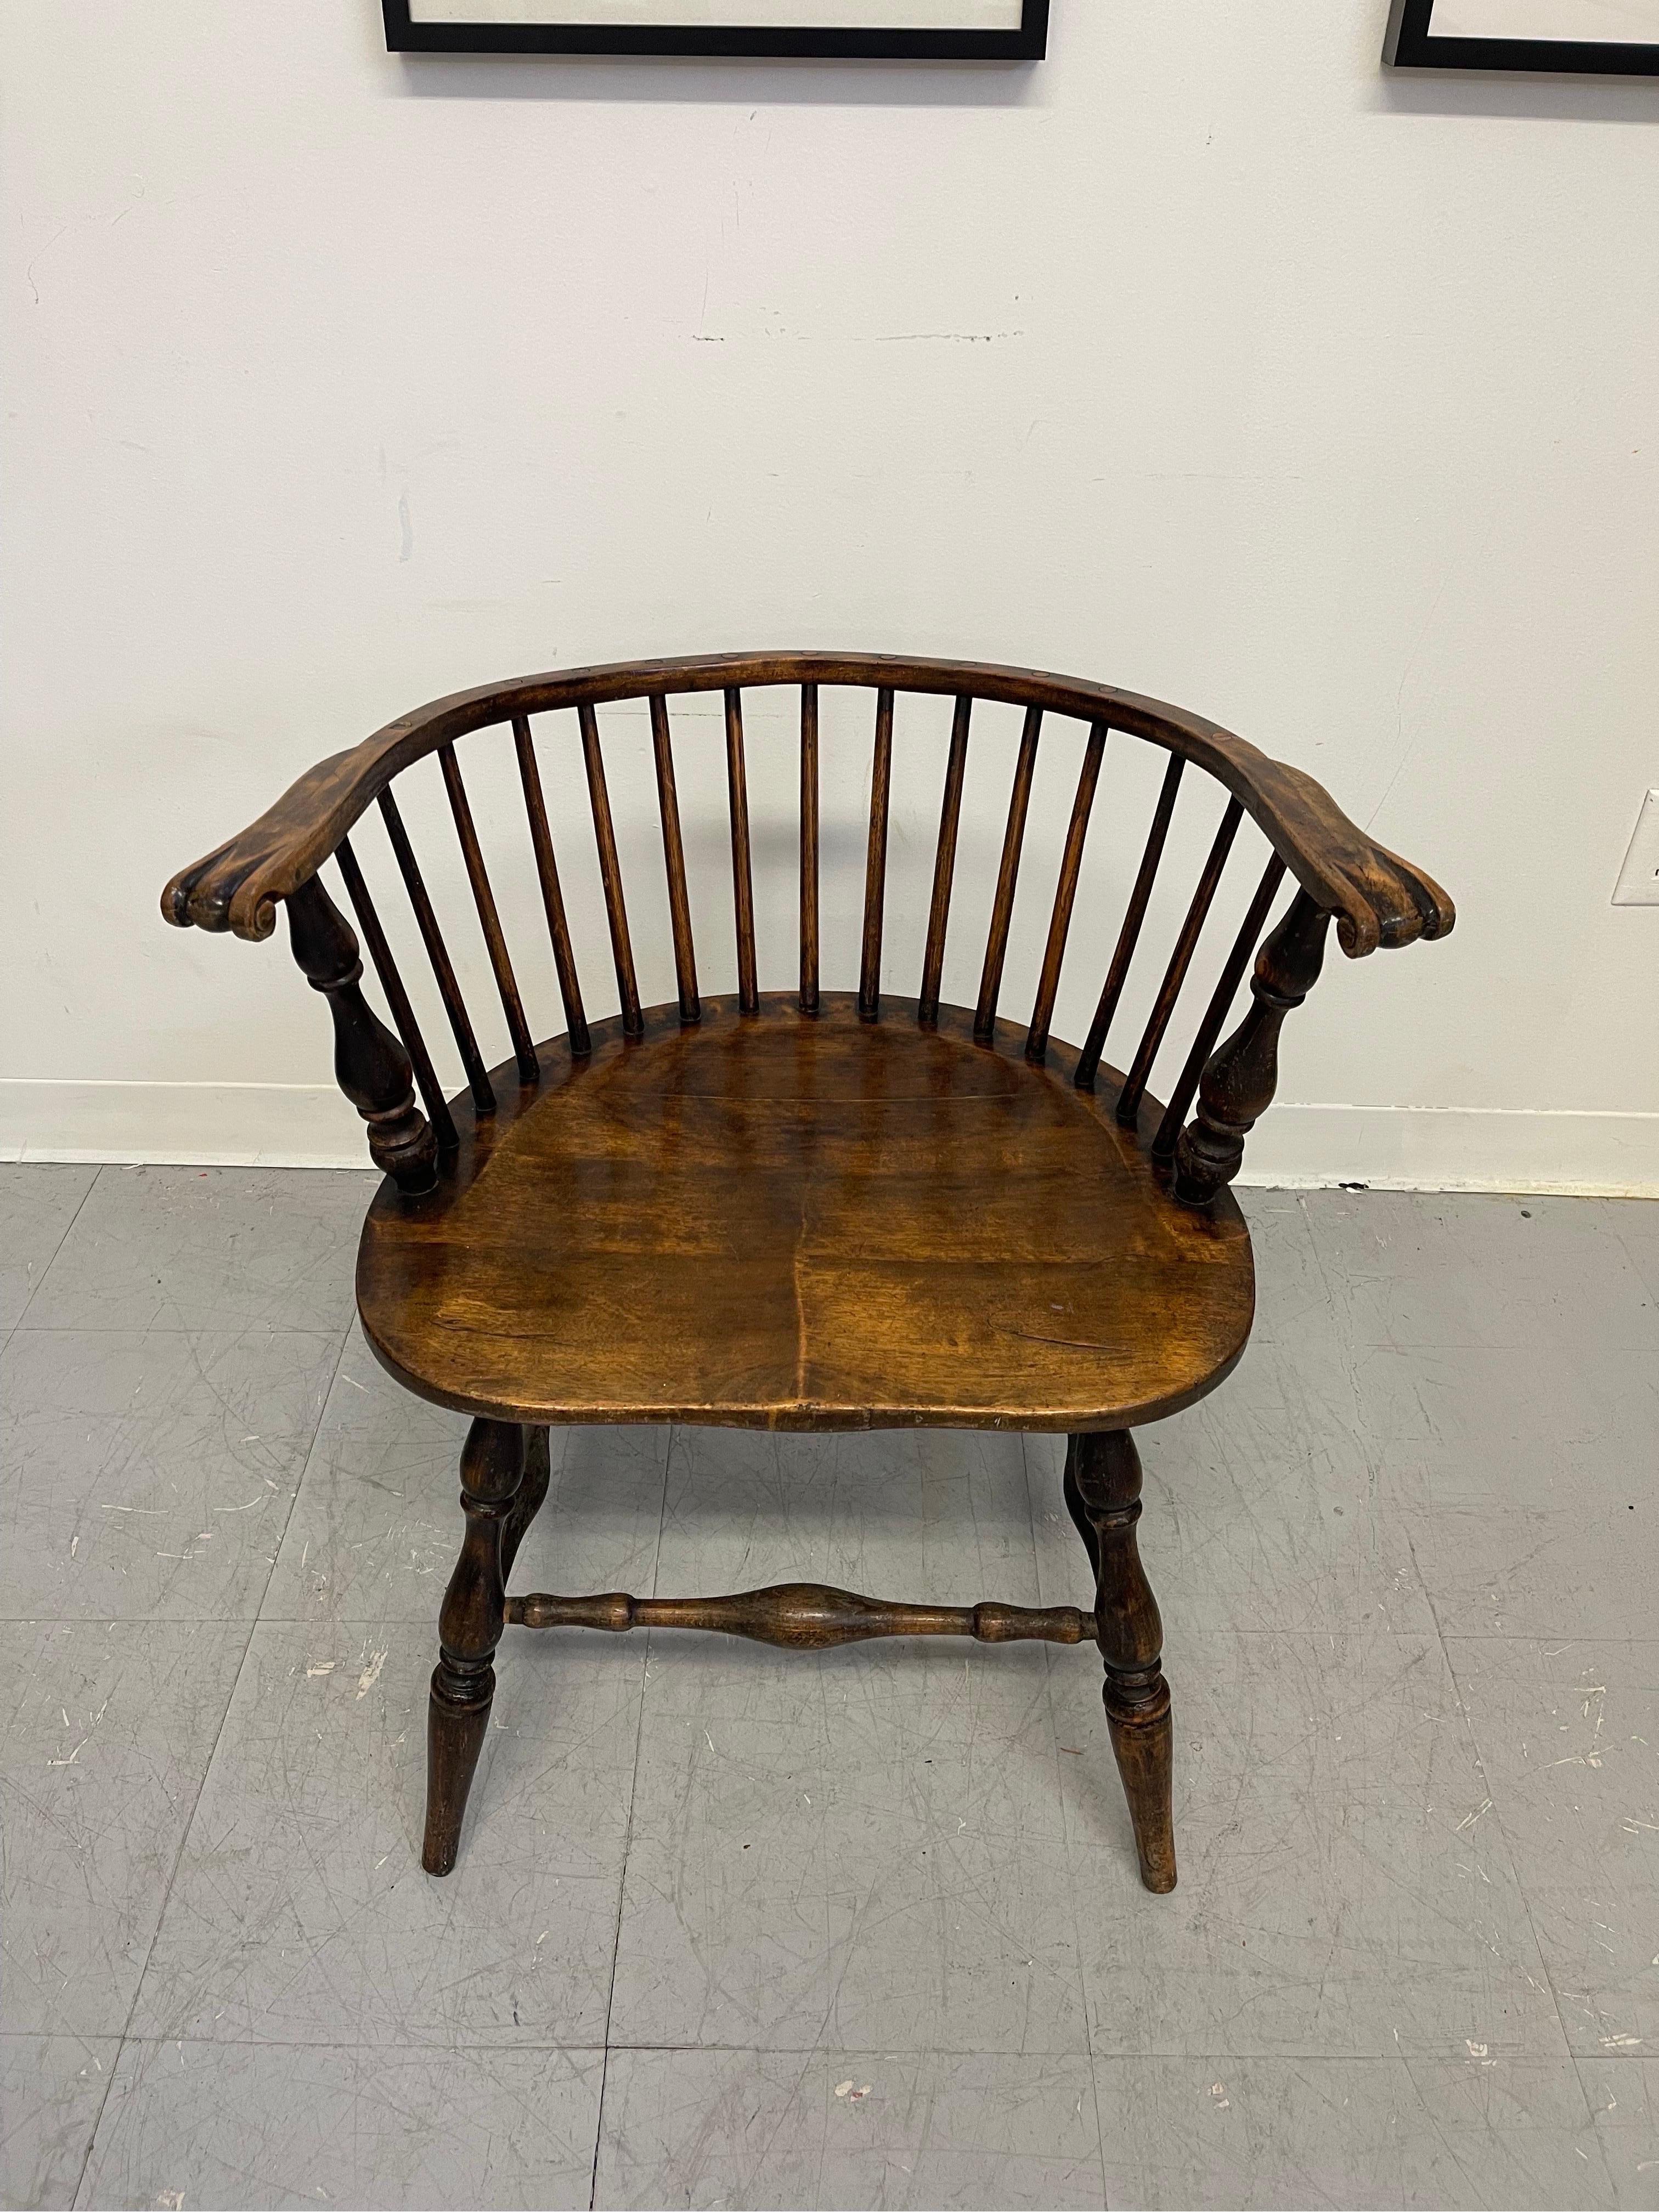 Low Comb Pub Chair. Turned Leg. Rich Petina to the Wood. Claw Carvings at the Edge of Each Arm. Vintage Condition Consistent with Age as Pictured.

Dimensions. 25 W ; 18 D ; 28 H